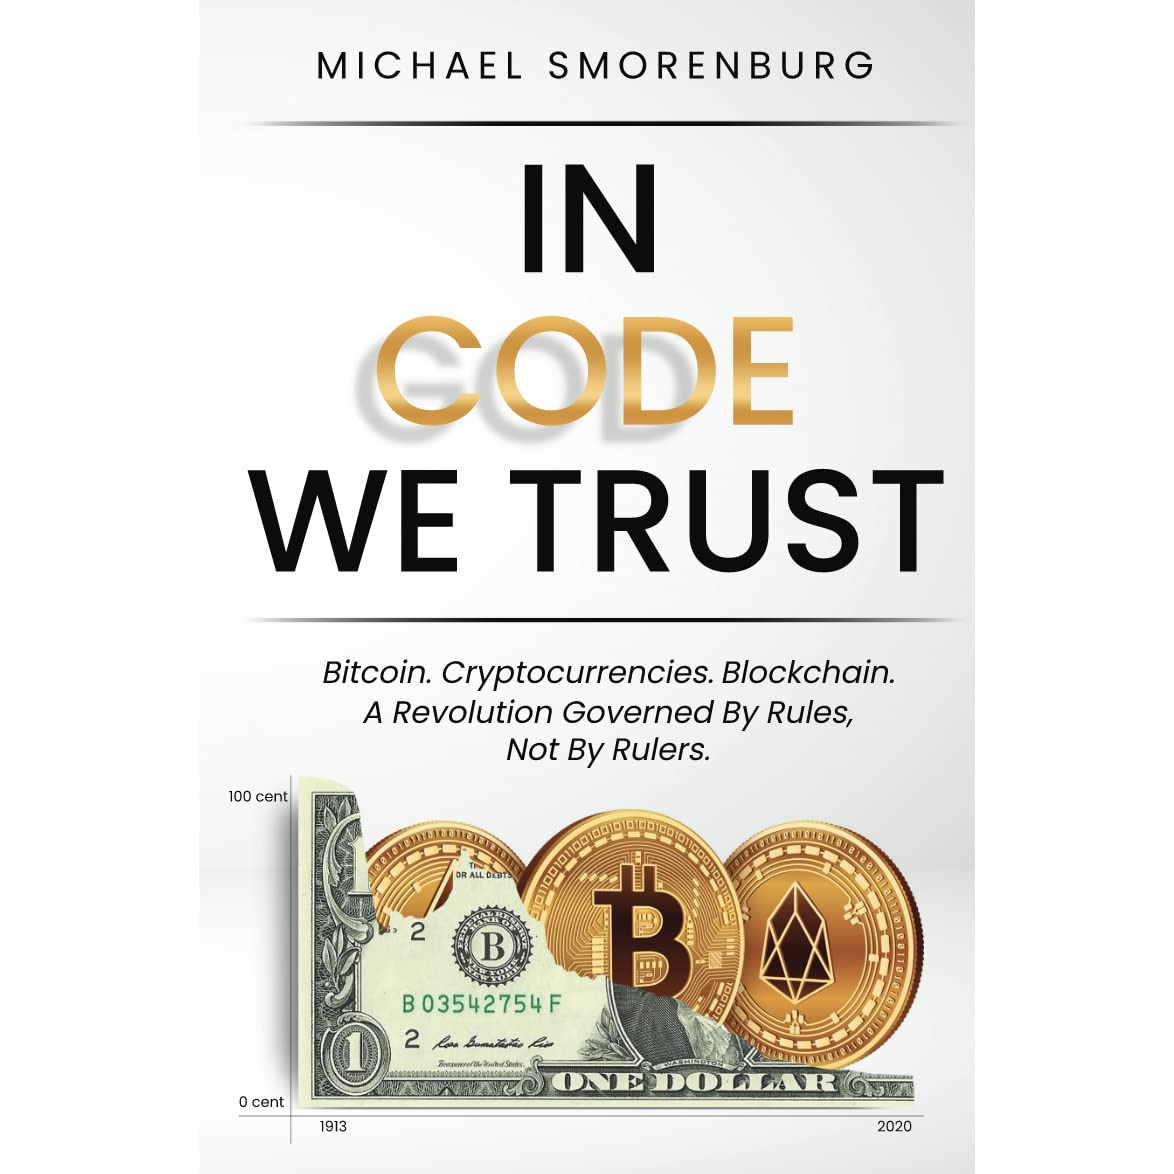 IN CODE WE TRUST--Bitcoin, Cryptocurrencies, Blockchain. A Revolution  Governed by Rules, not by Rulers. by Michael Smorenburg